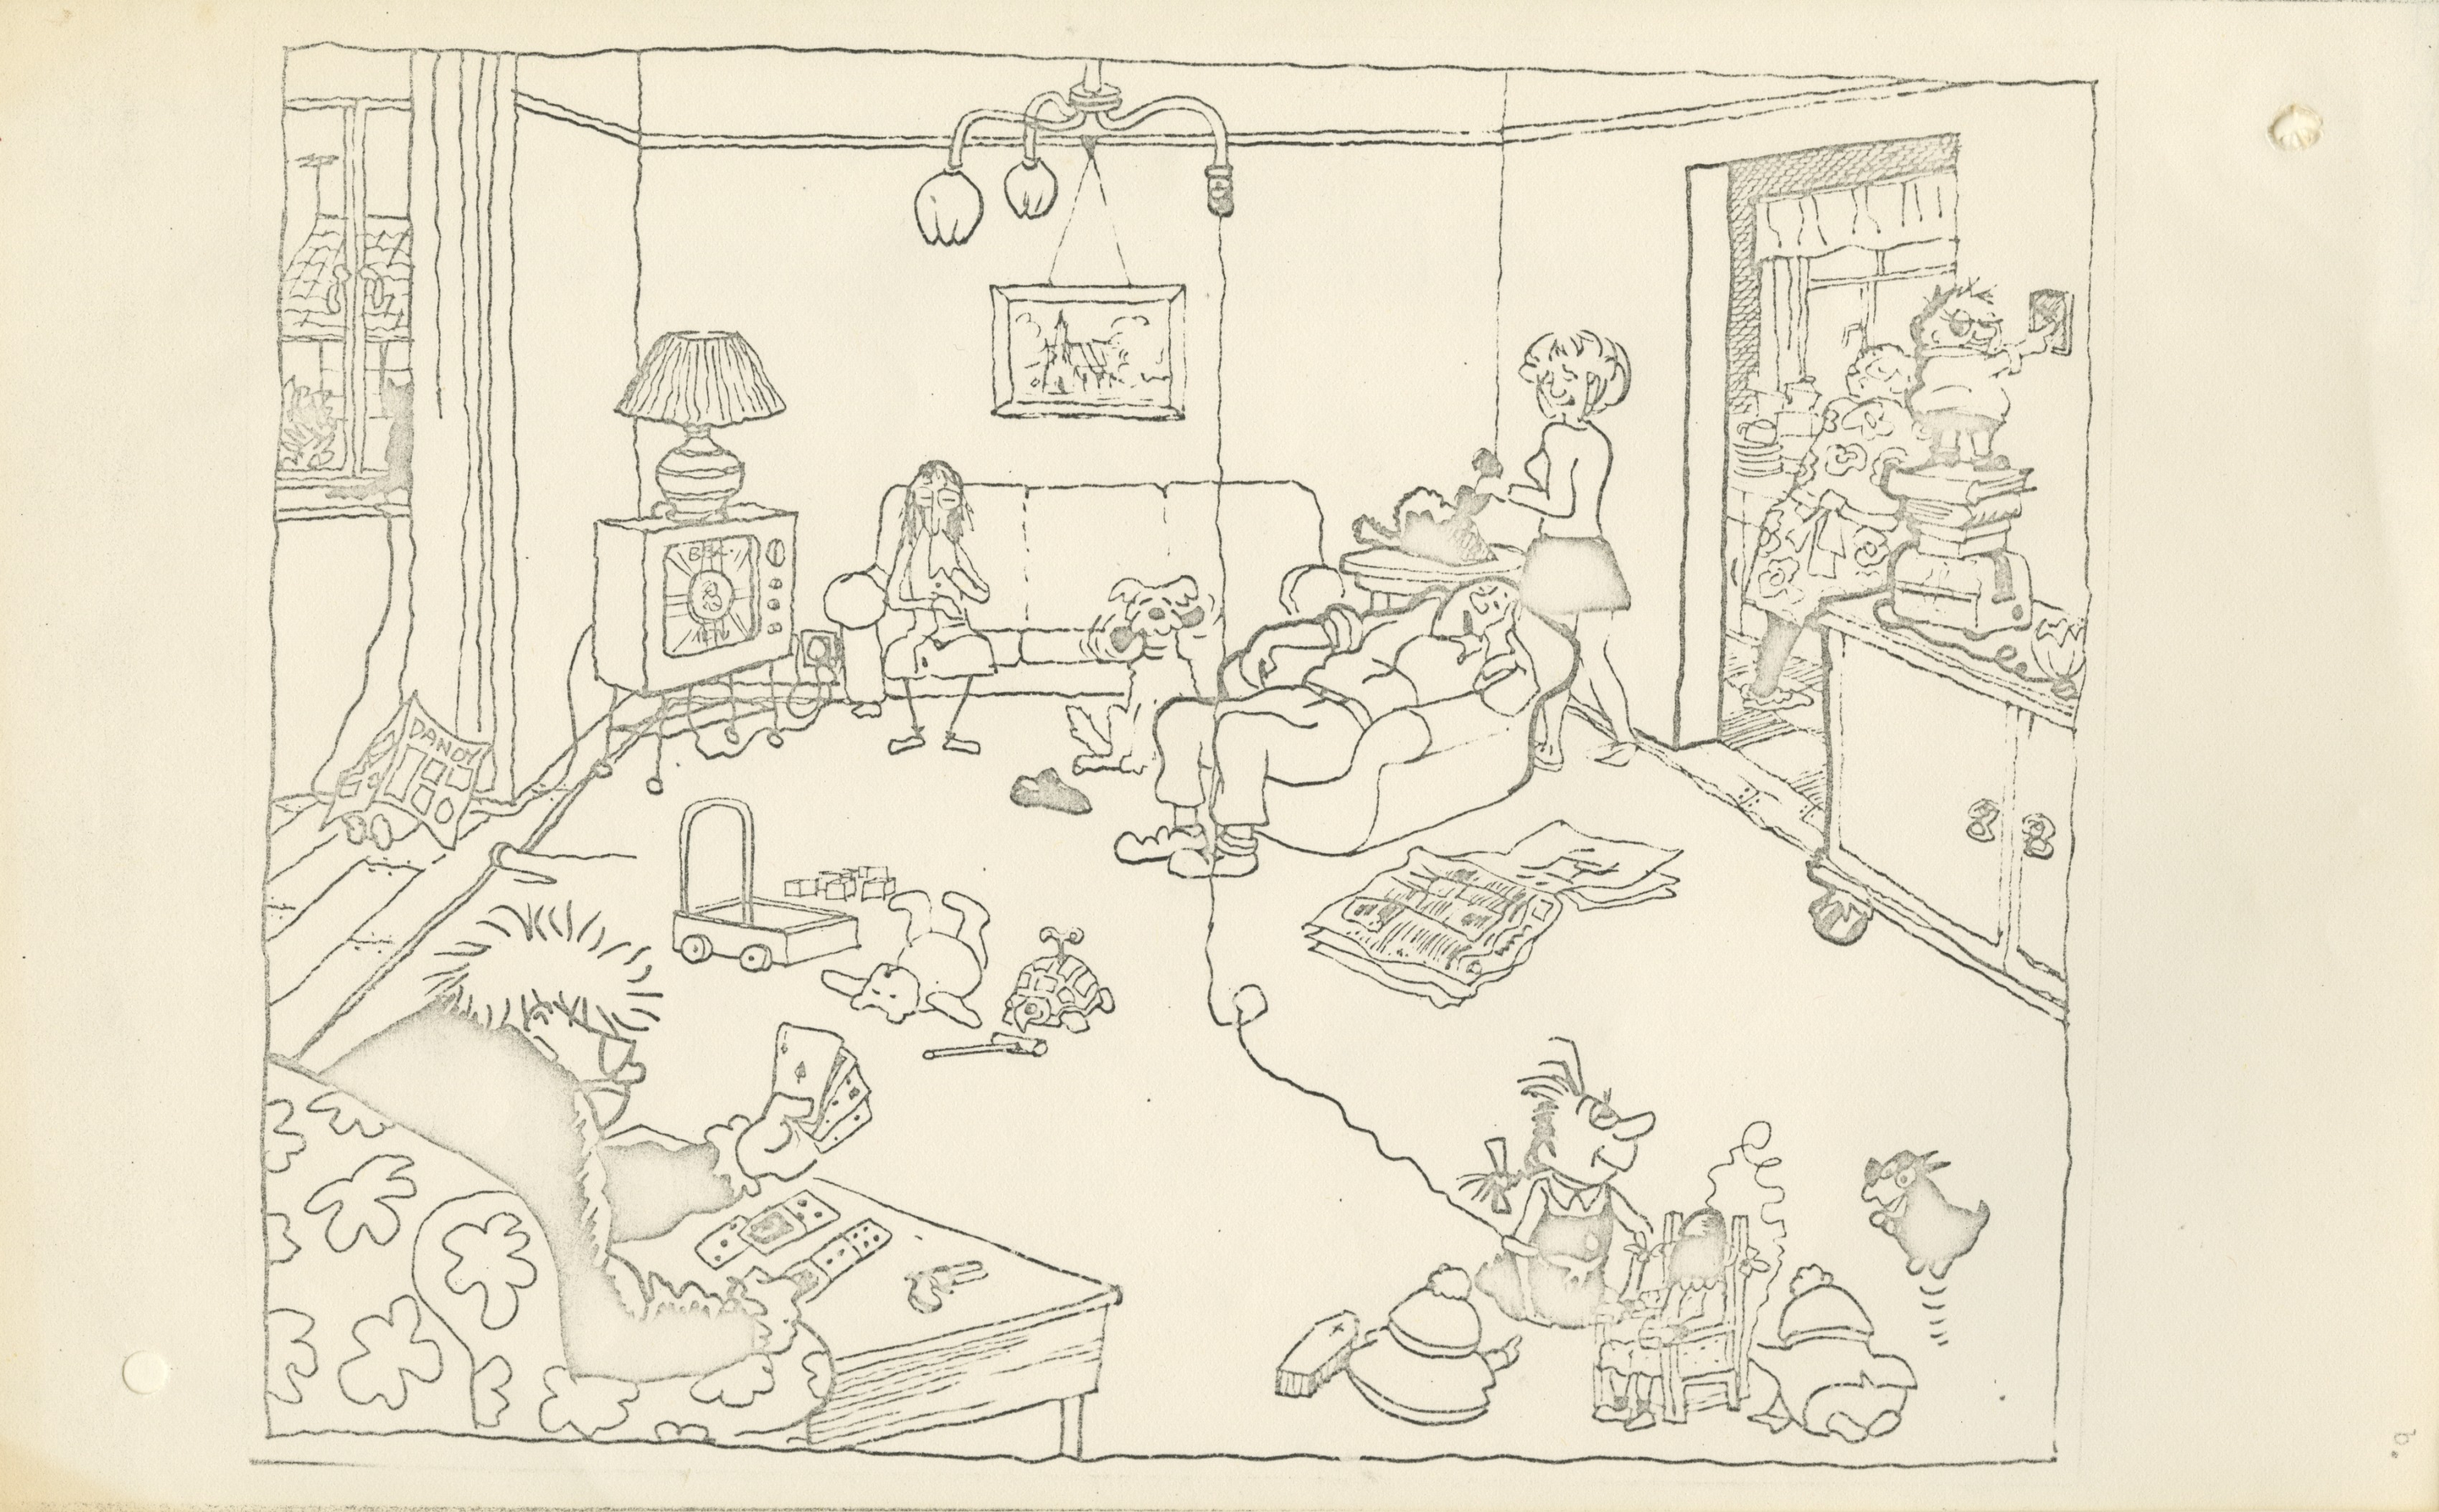 Drawing of opening scene of draft script for an episode of an animated comedy series about the Giles Family - James McClure, undated (Image ref: GACS00775C)